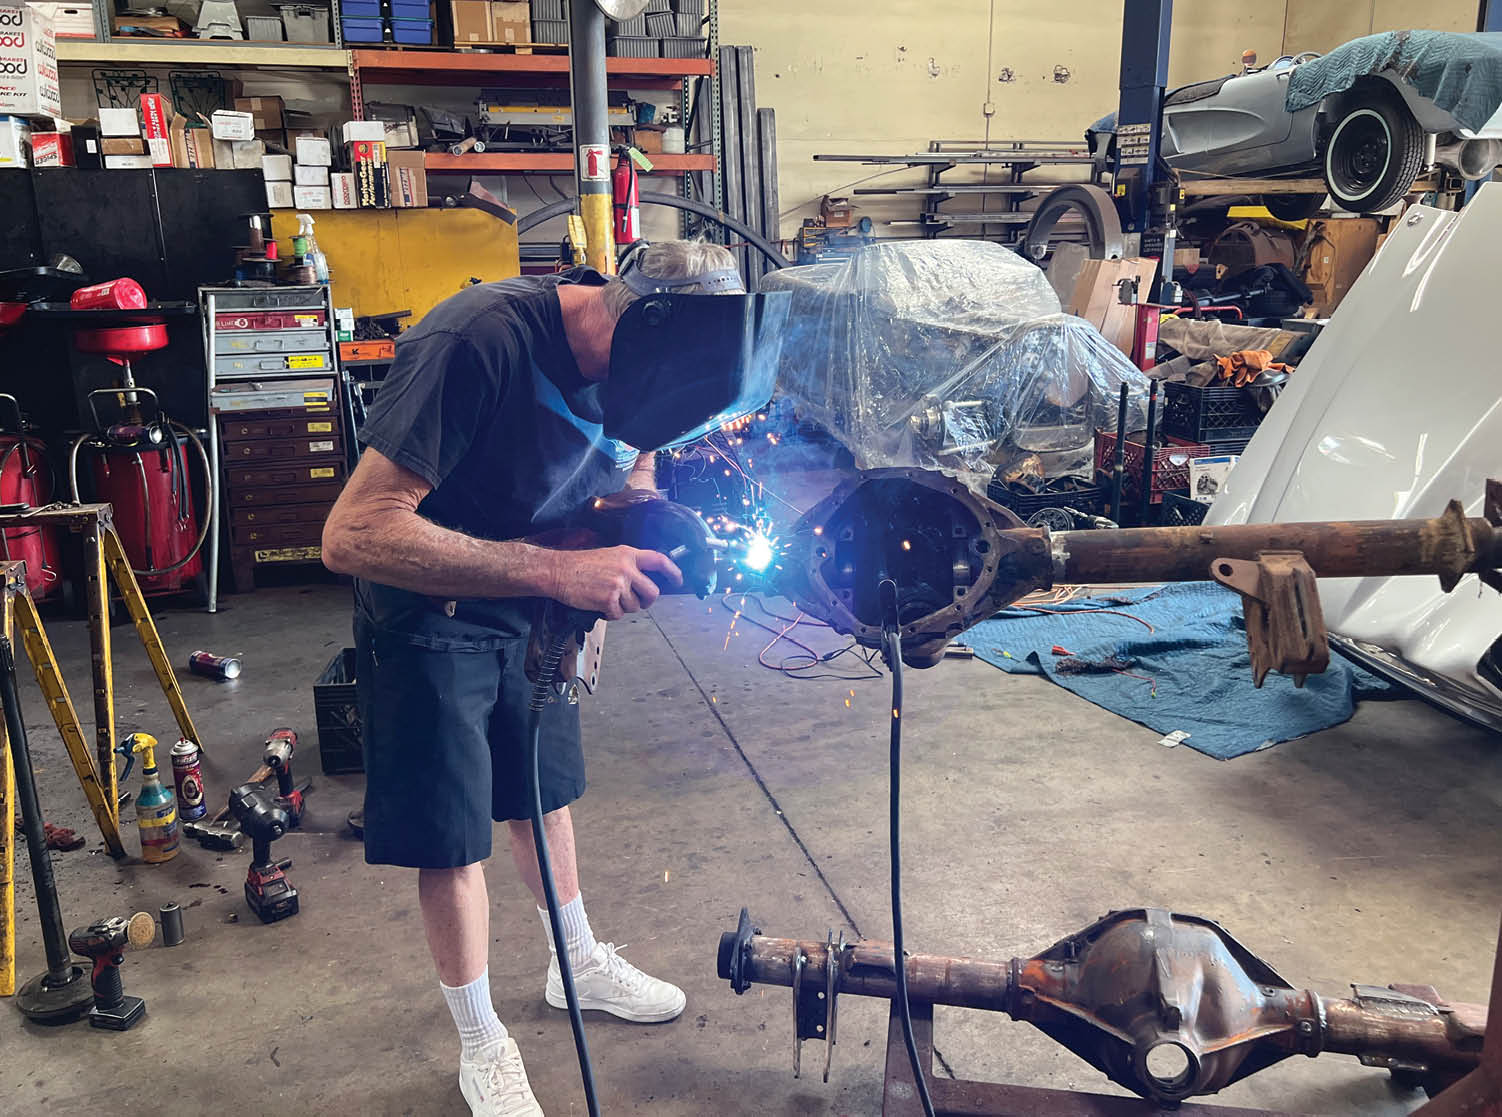 To prevent warping, the axle tube’s welding is done with short beads while skipping around the circumference and going from one side to the other.